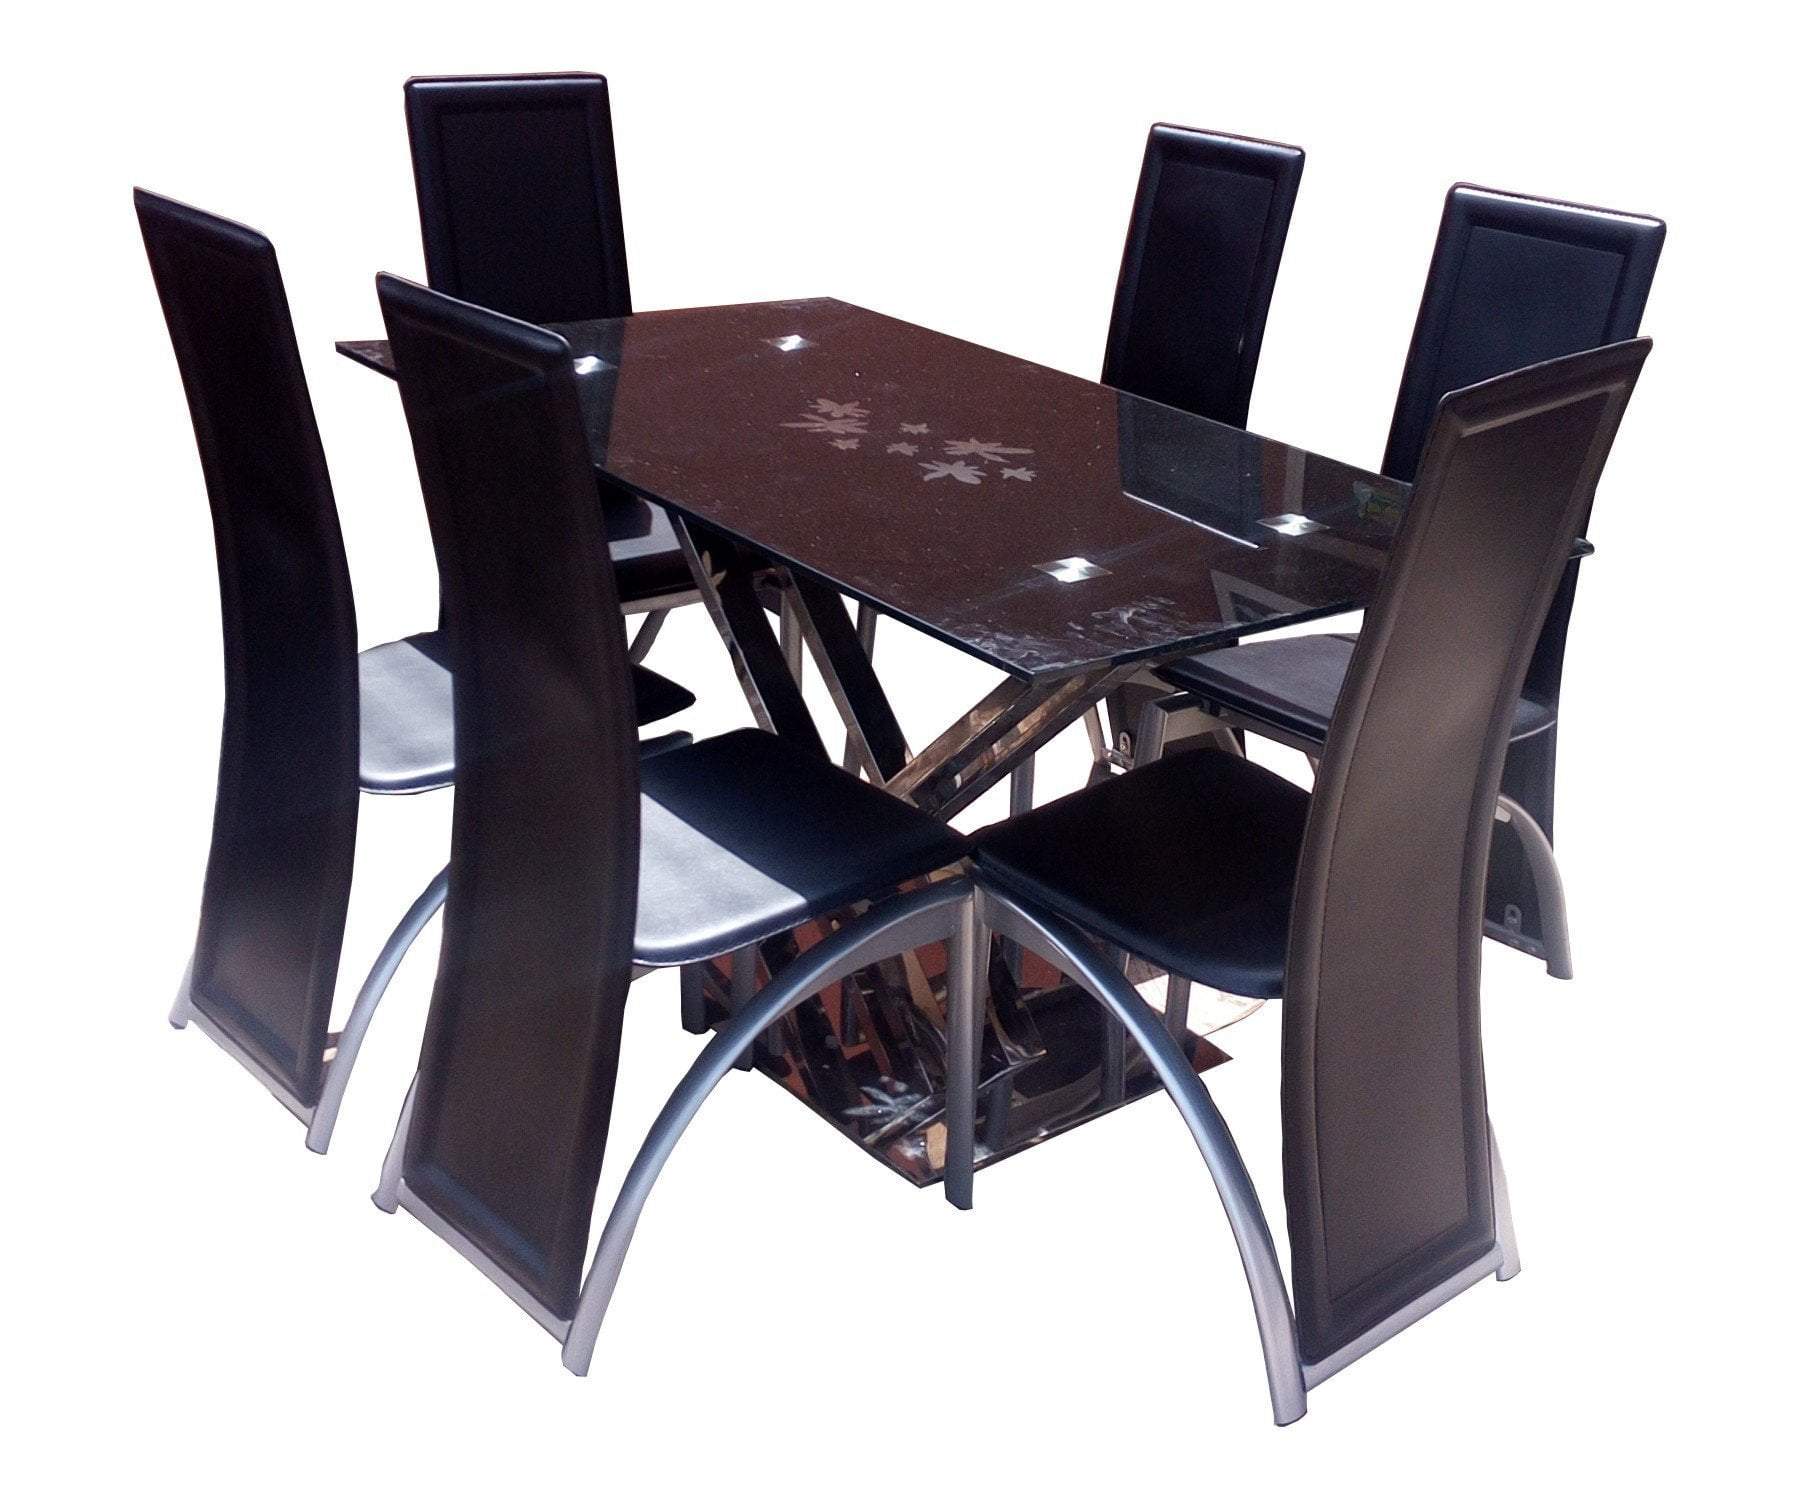 Zico Chrome Frame Glass Dining Table